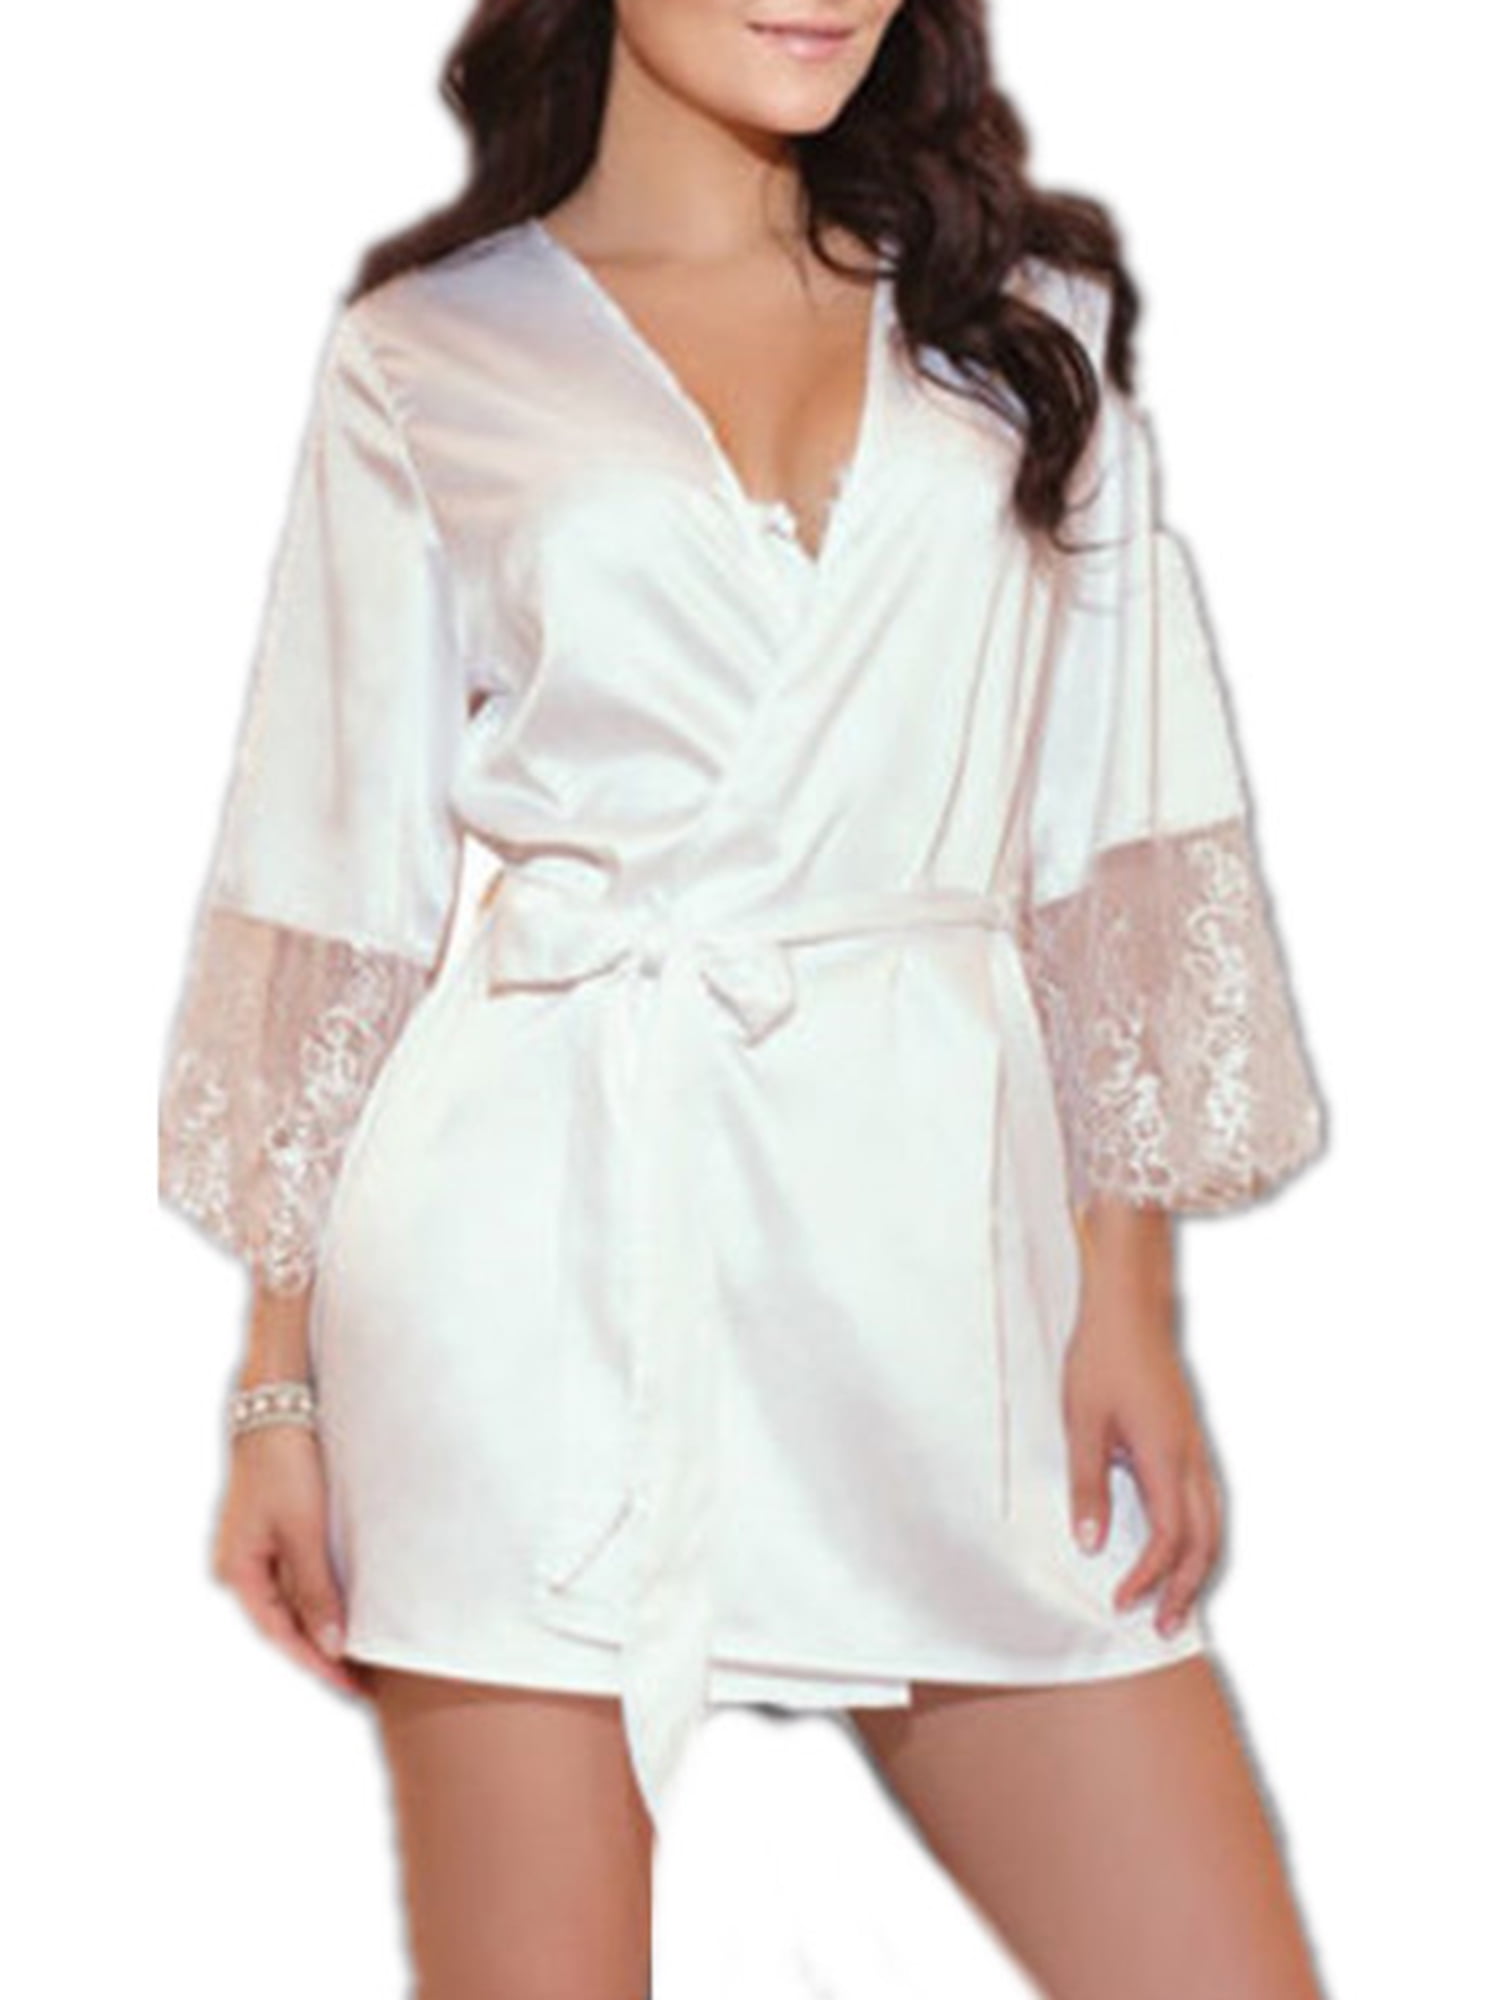 Satin and lace dressing gown - Old rose - Ladies | H&M IN